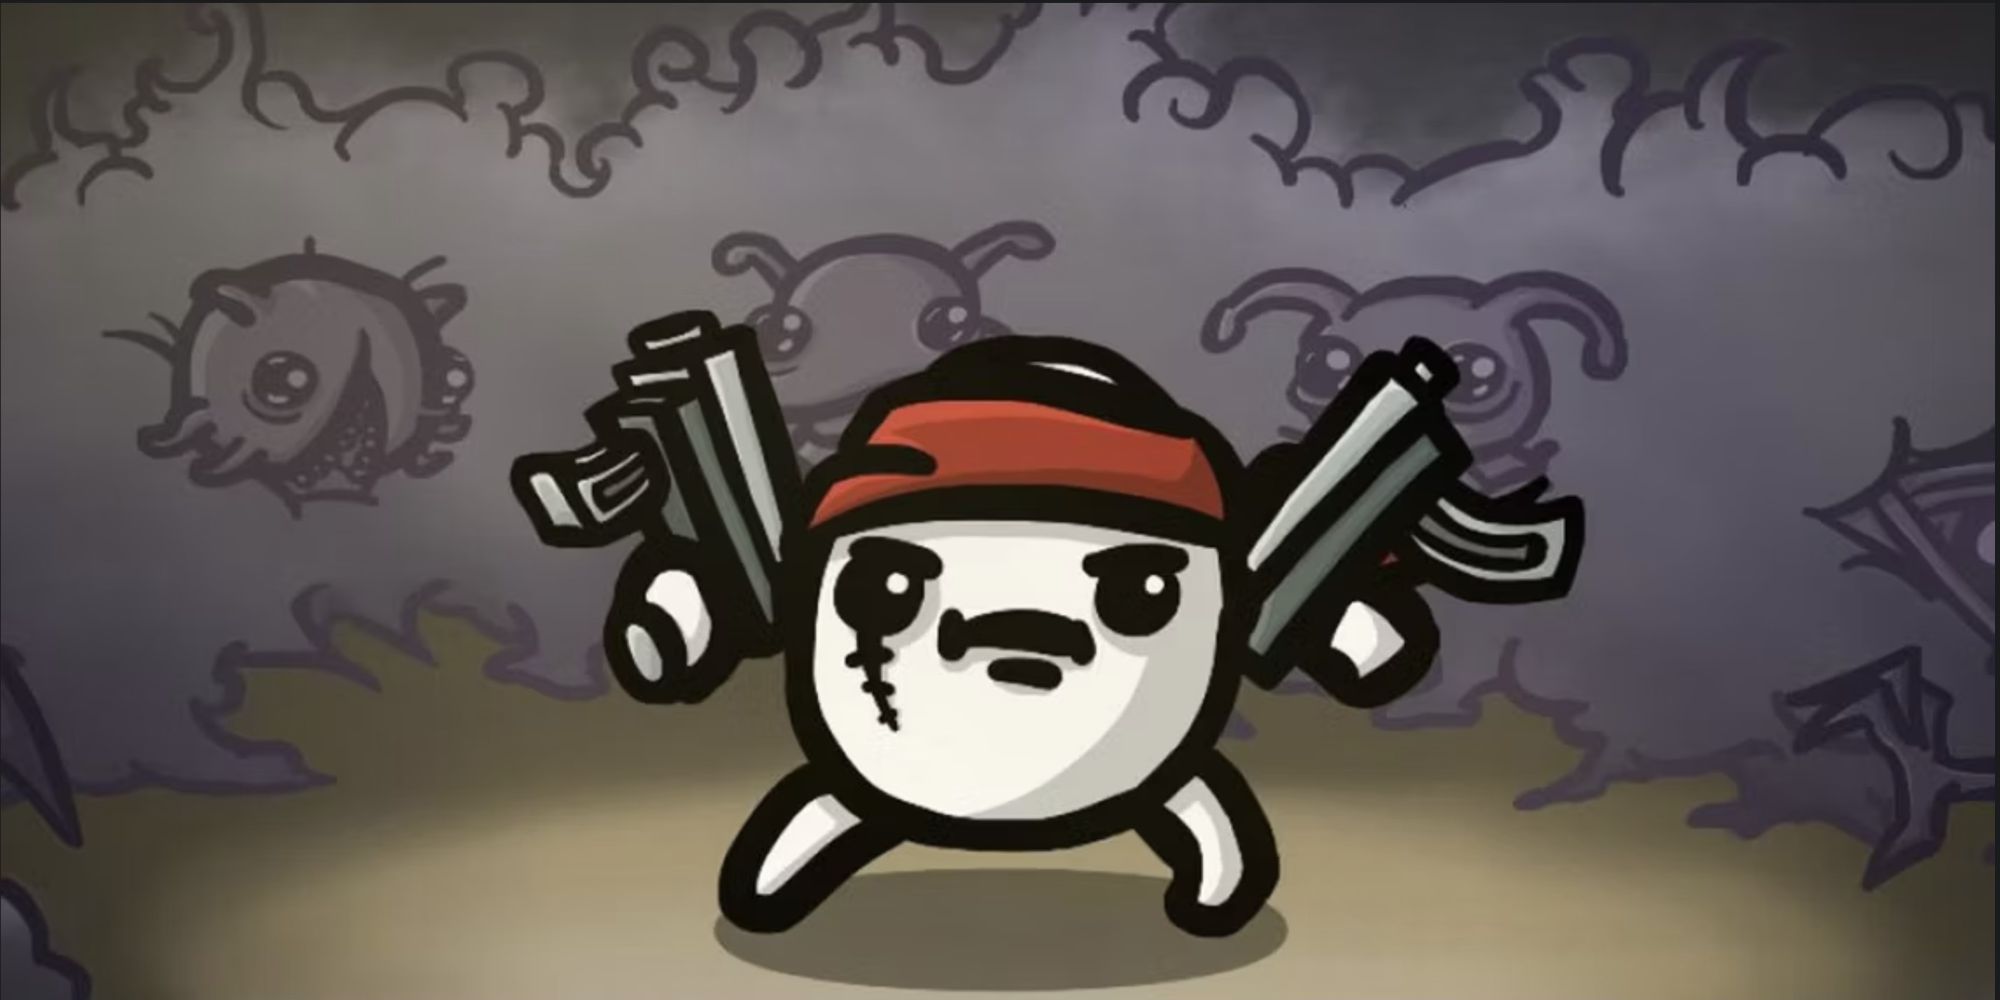 Brotato is carrying two machine guns and is wearing a red bandana. He is surrounded by monsters